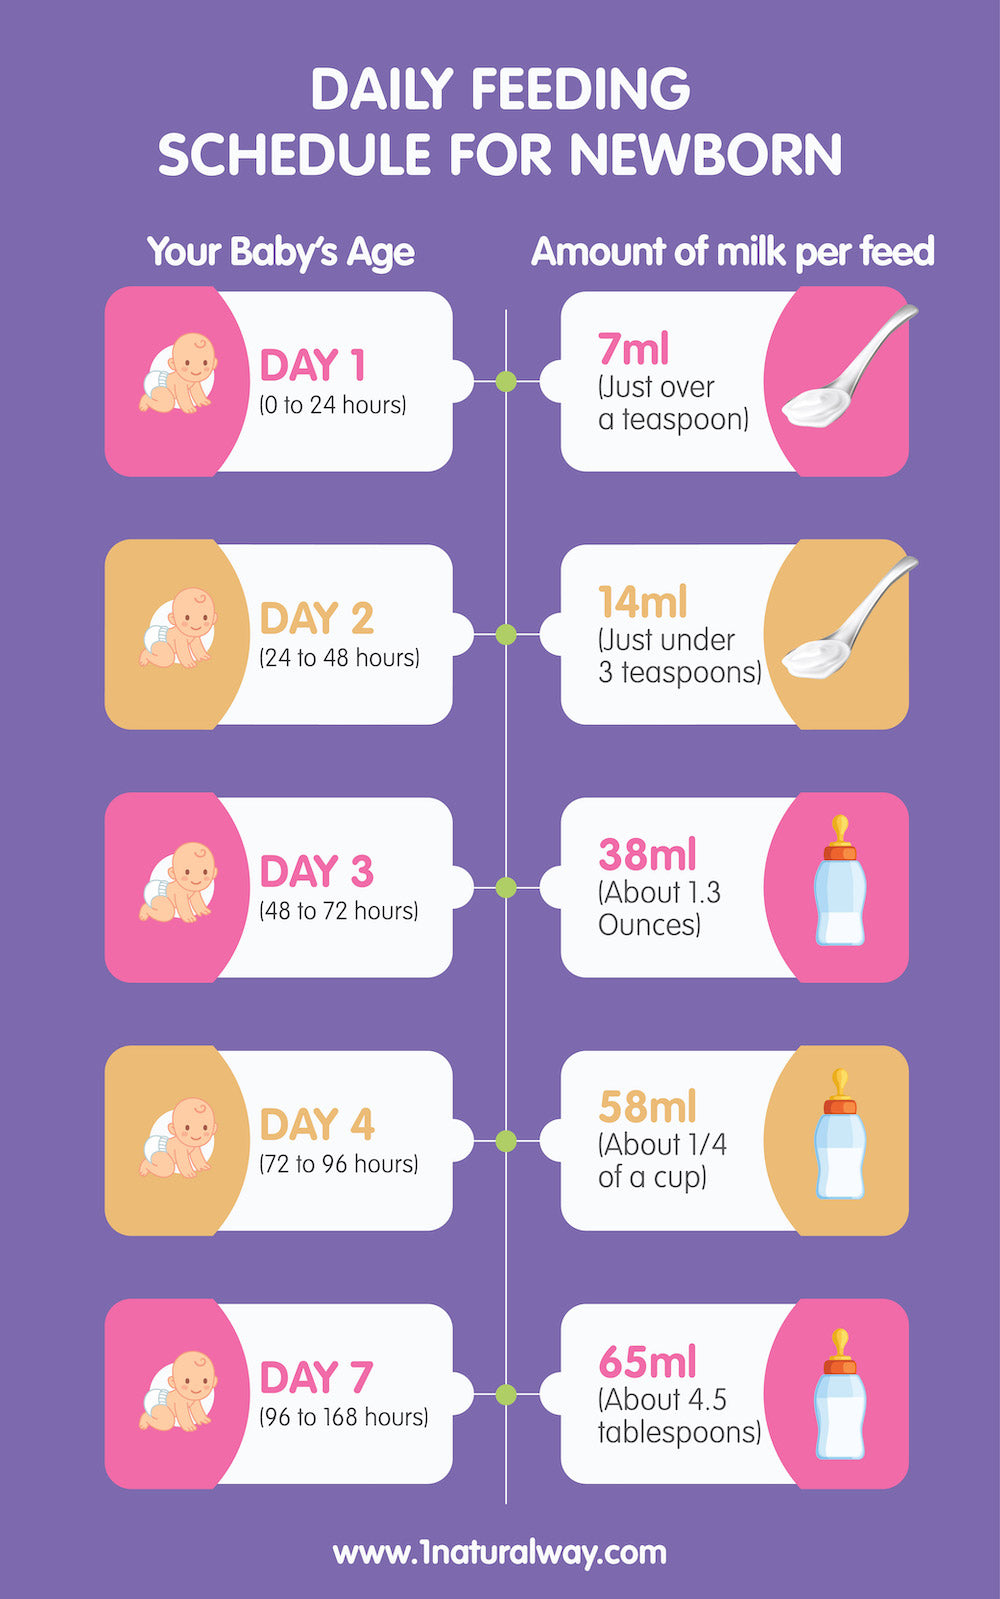 Breastfeeding Timeline: Know What to Expect | 1 Natural Way